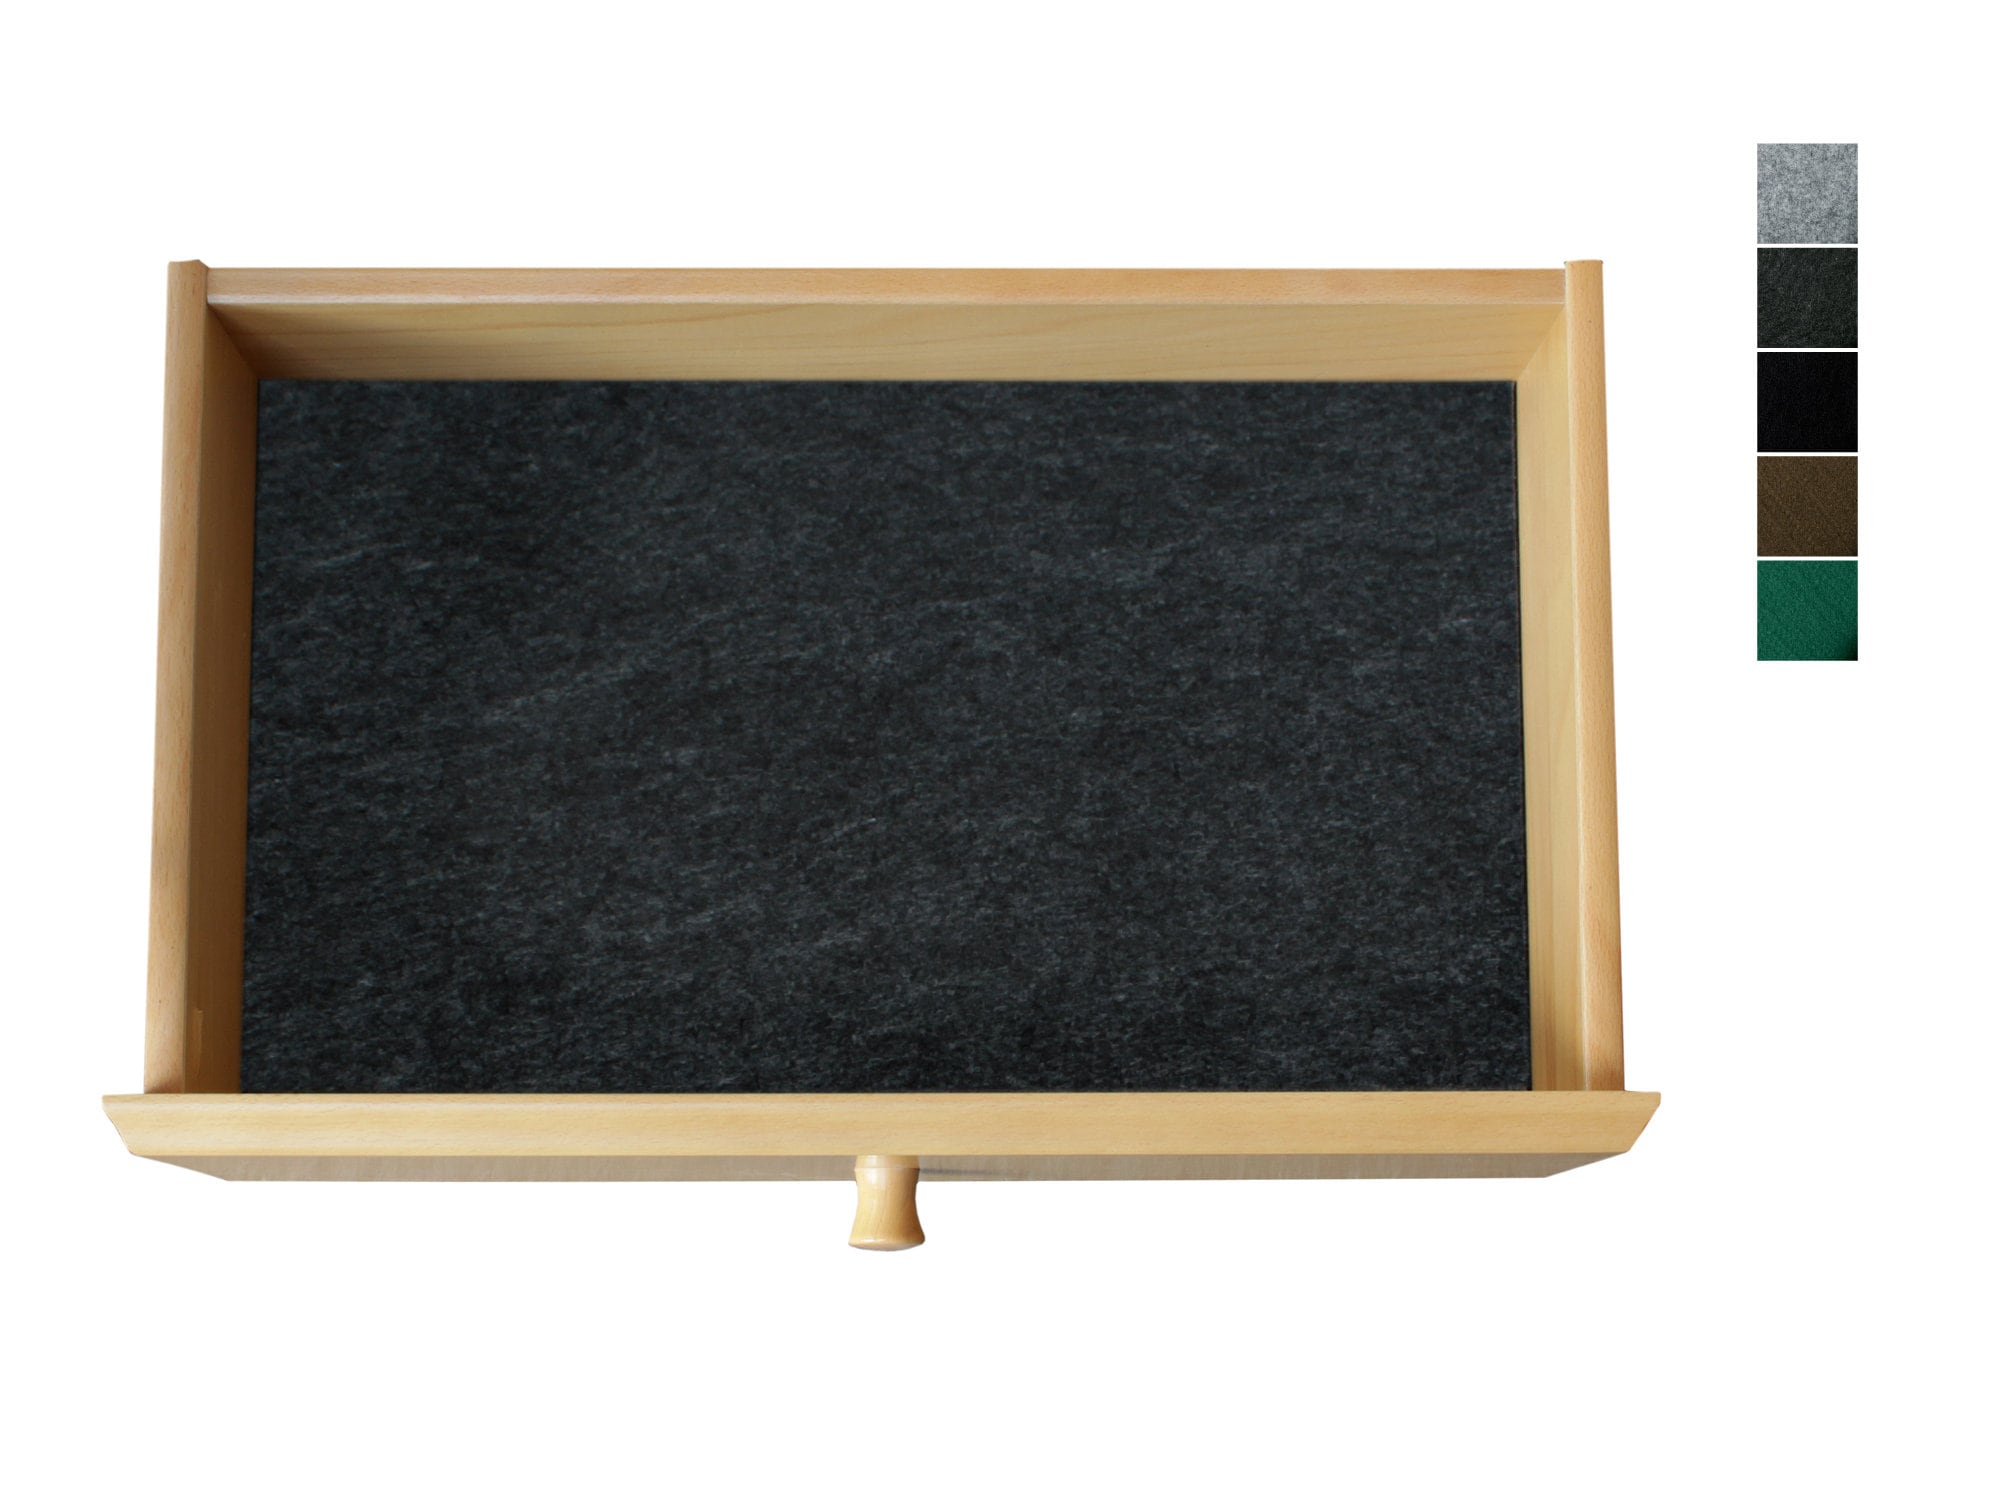 Made-to-measure Drawer Insert / Protective Insert / Protective Mat Made of  Felt 